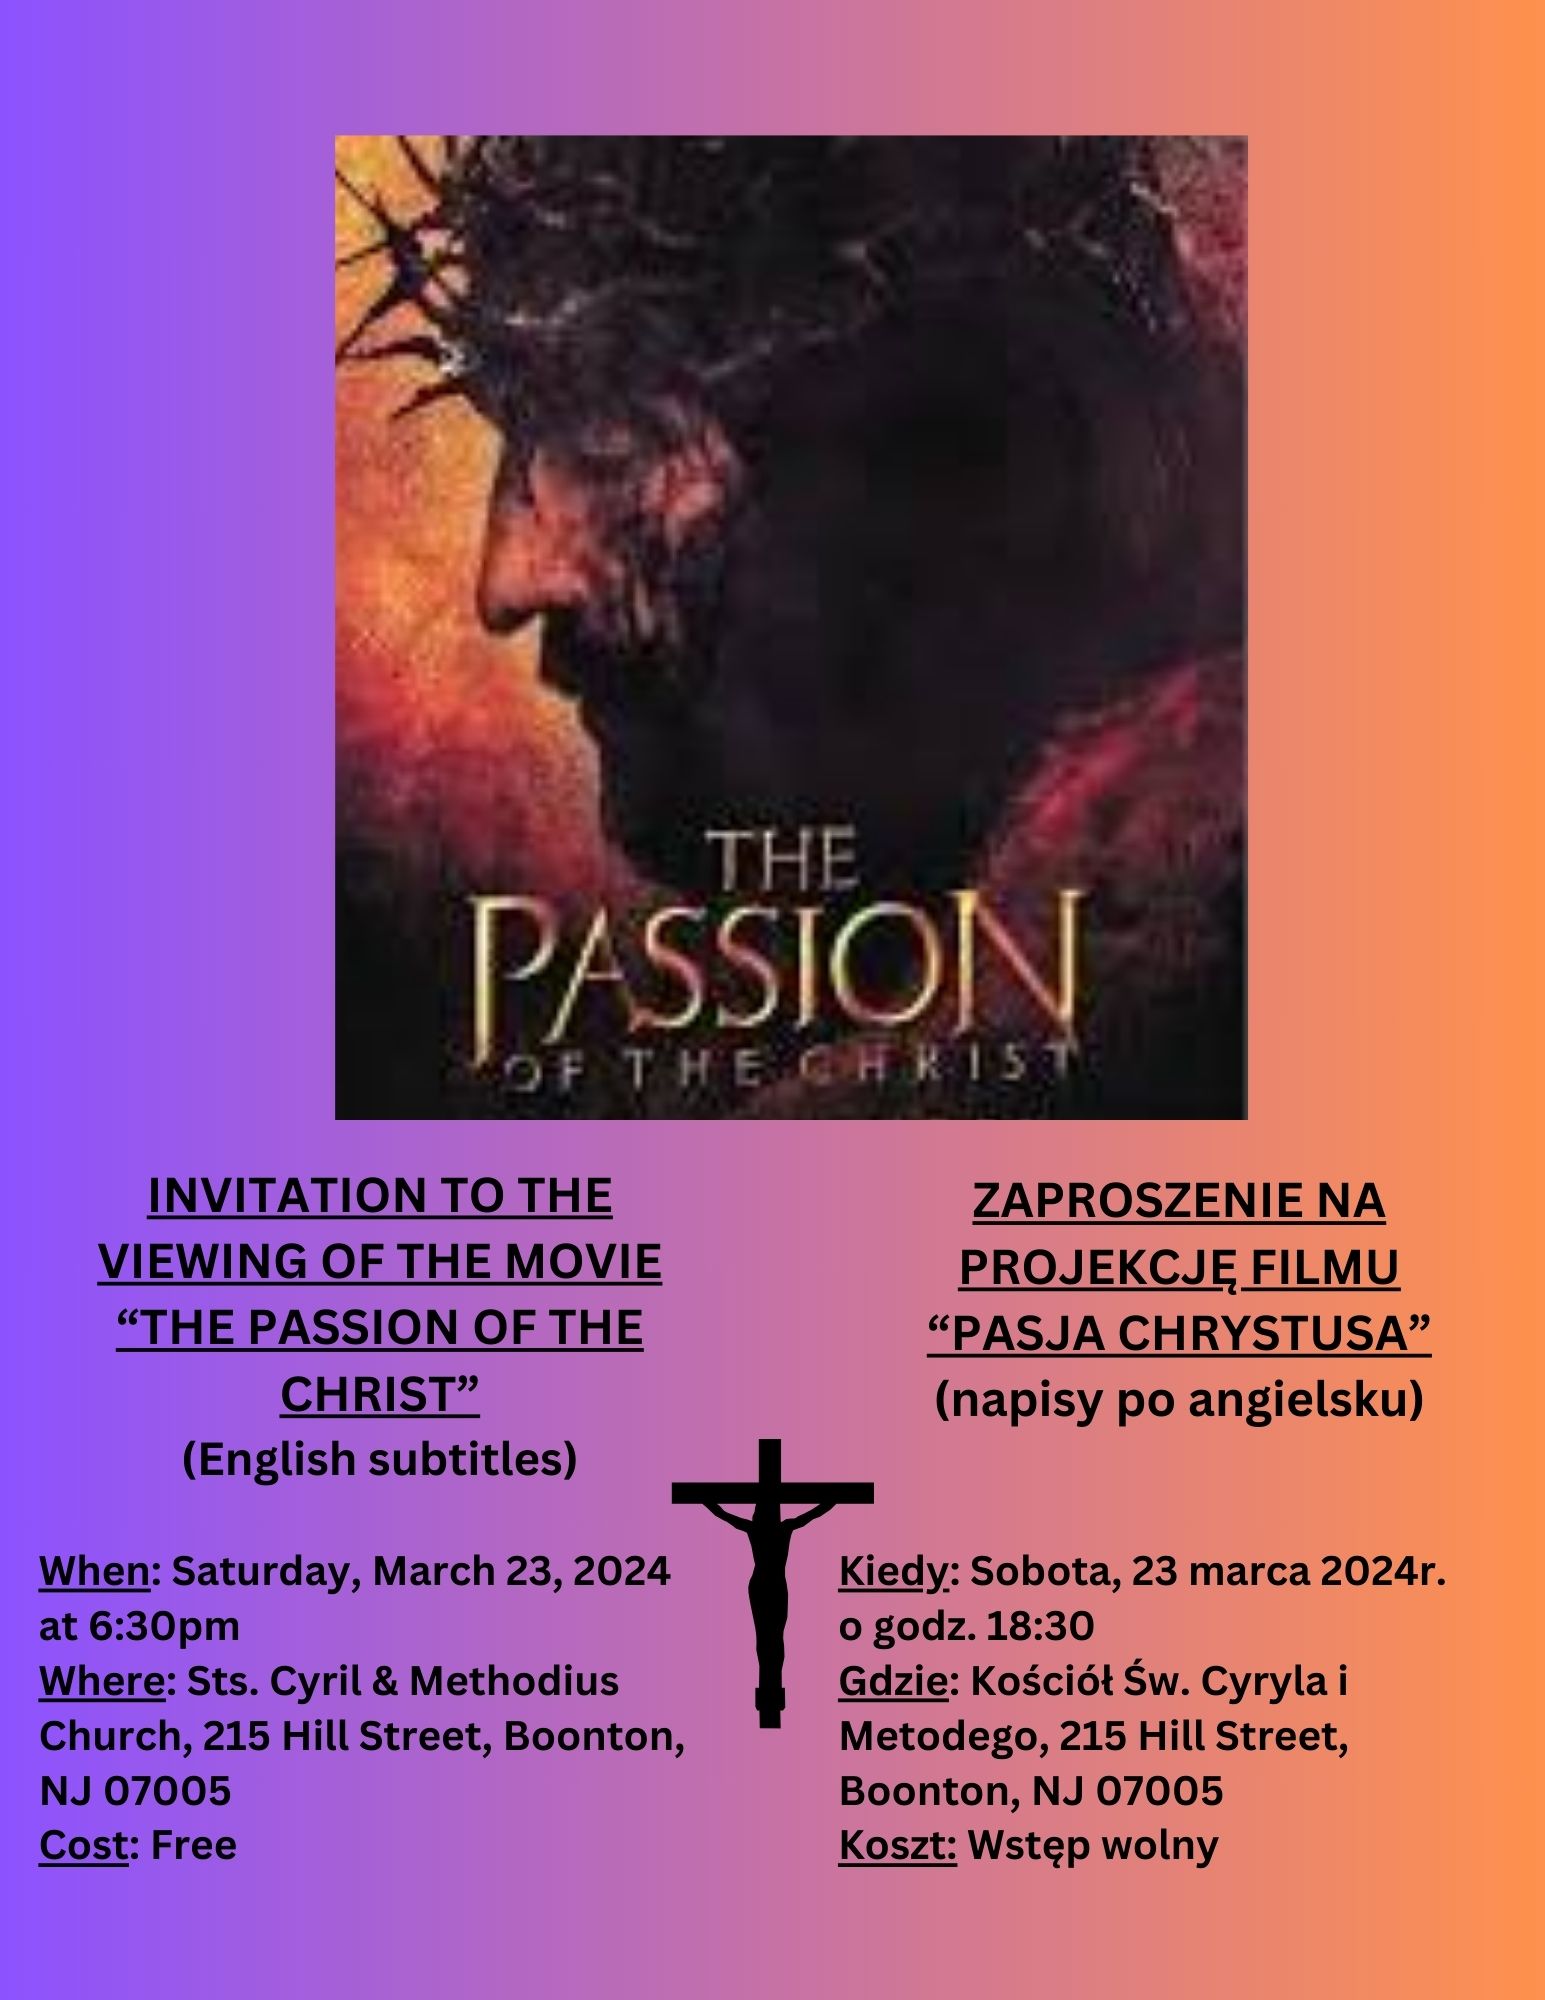 Passion Movie Poster